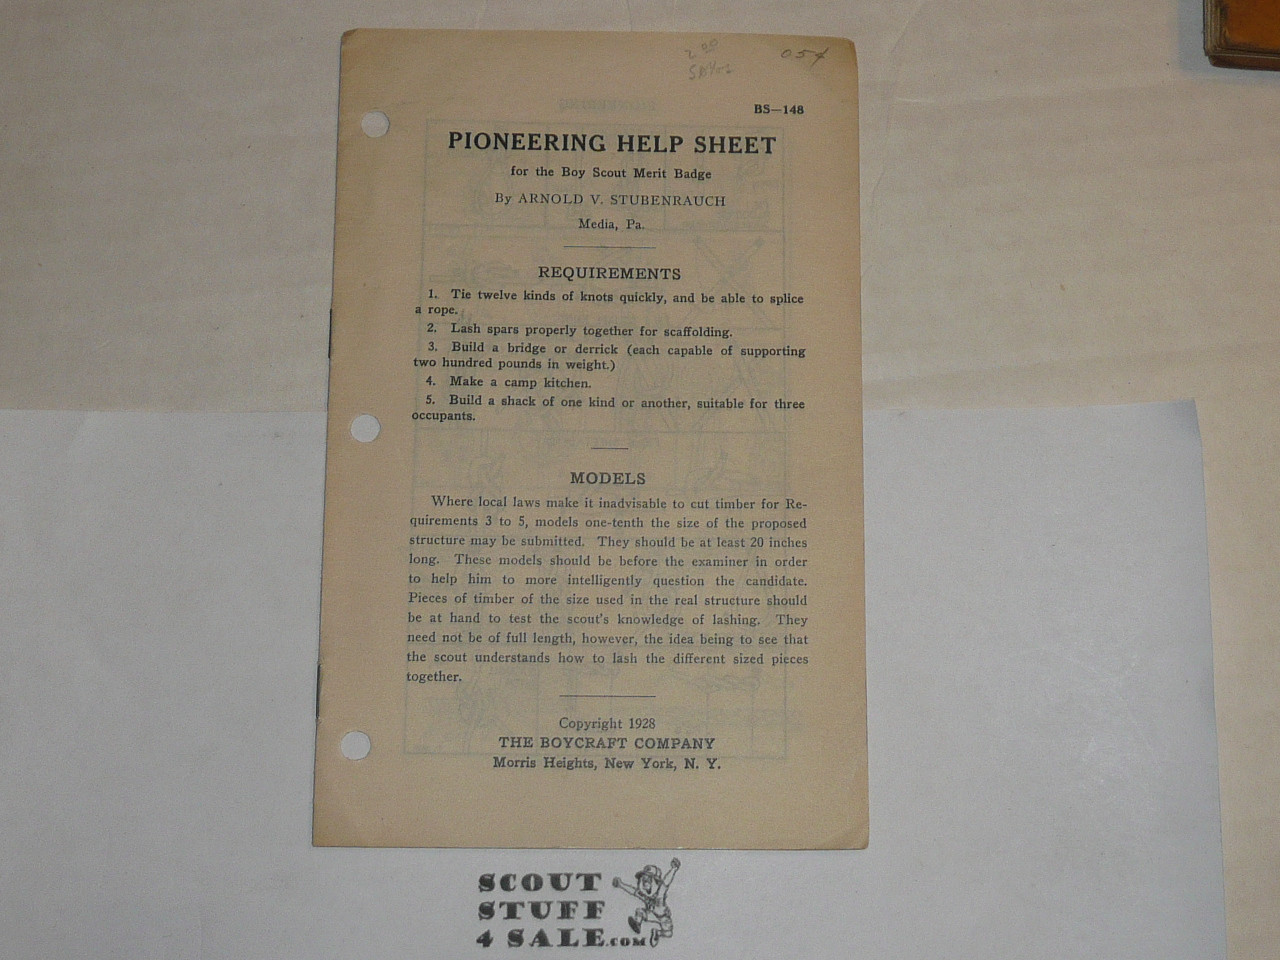 1928 Pioneering Help Sheet Leaflet, By The Boycraft Company, Approved by the BSA, Leaflet BS148, RARE